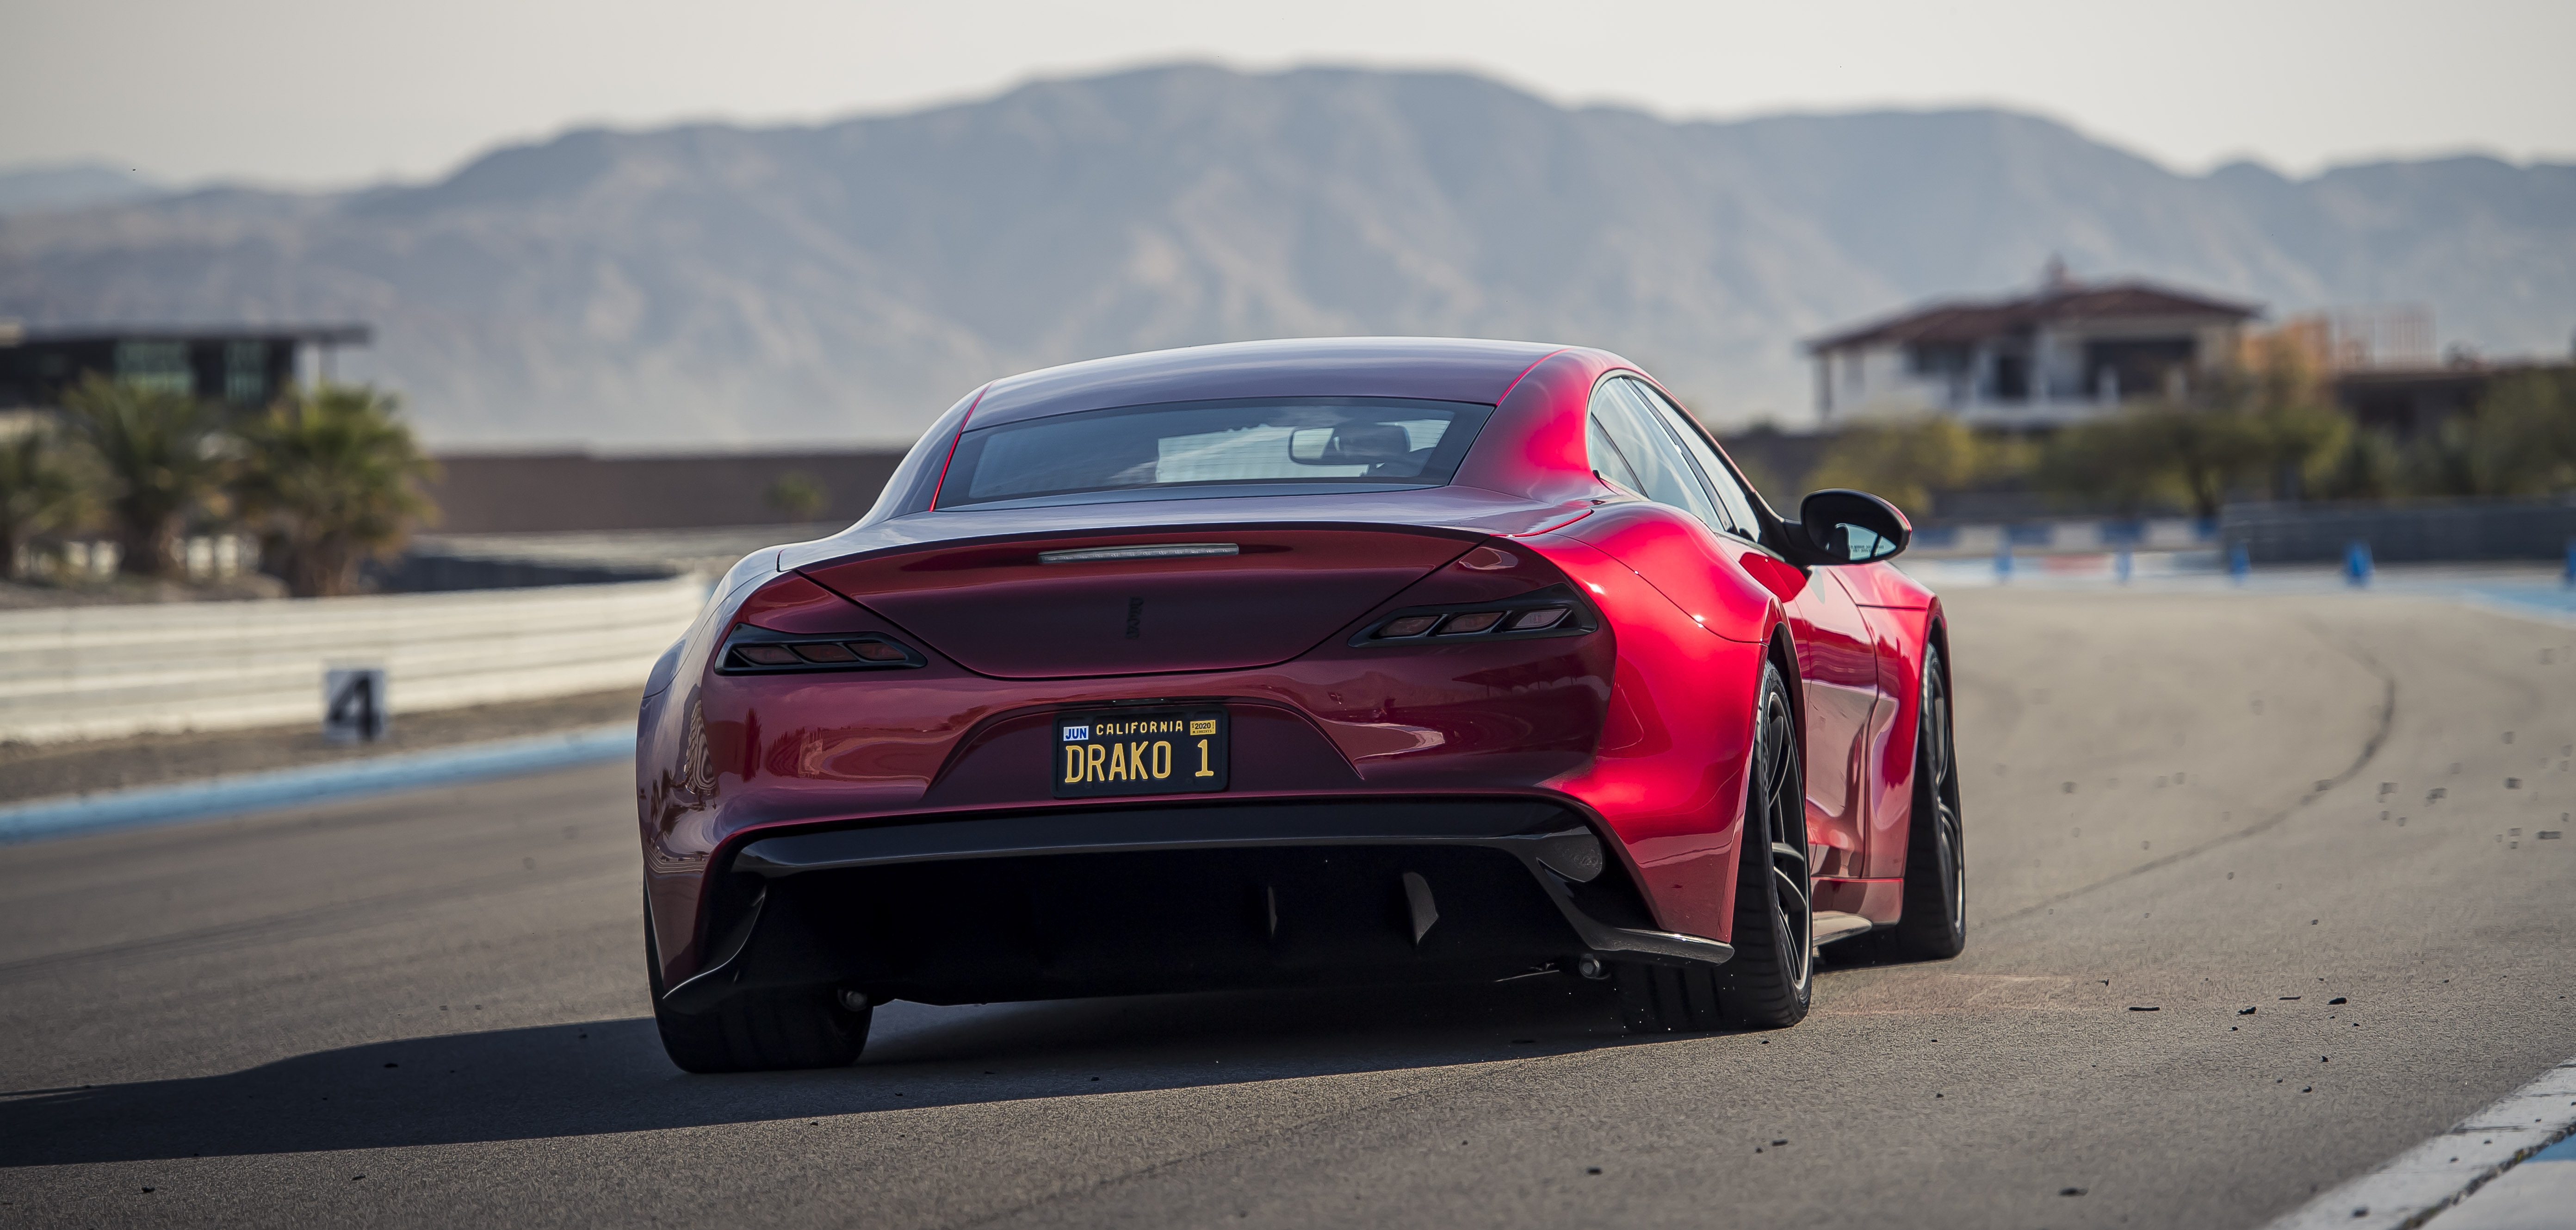 Drako GTE $1.2 million electric supercar: first ride and walkaround